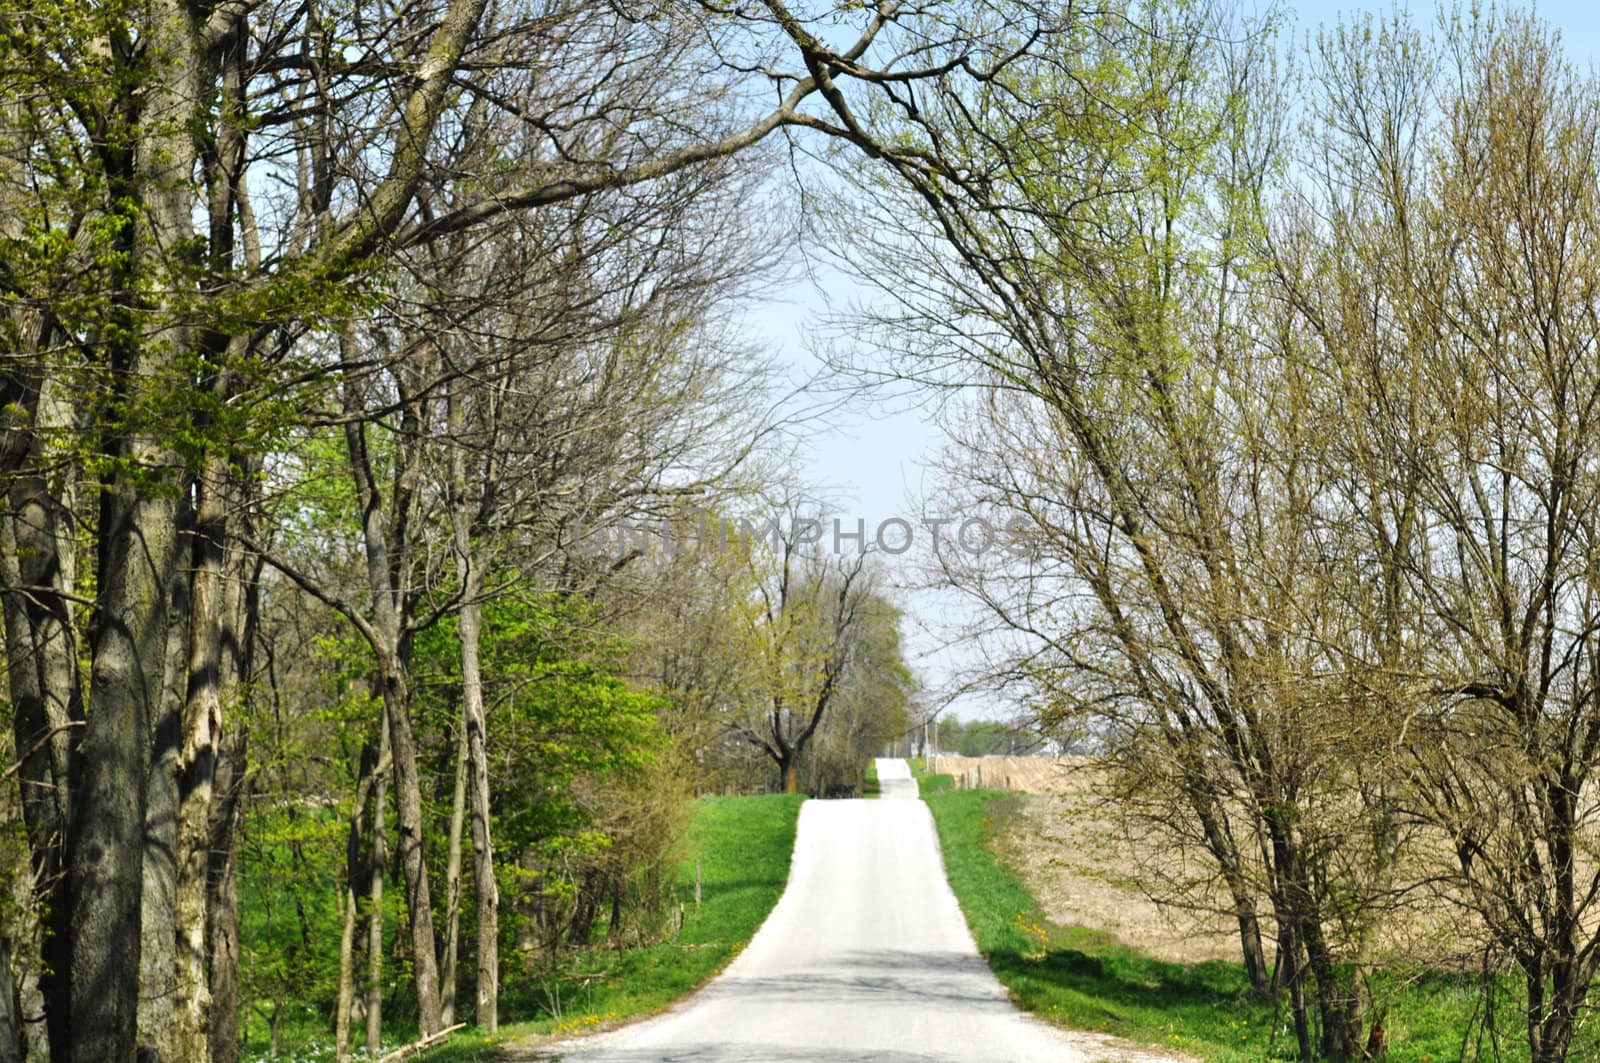 Road in the country by RefocusPhoto